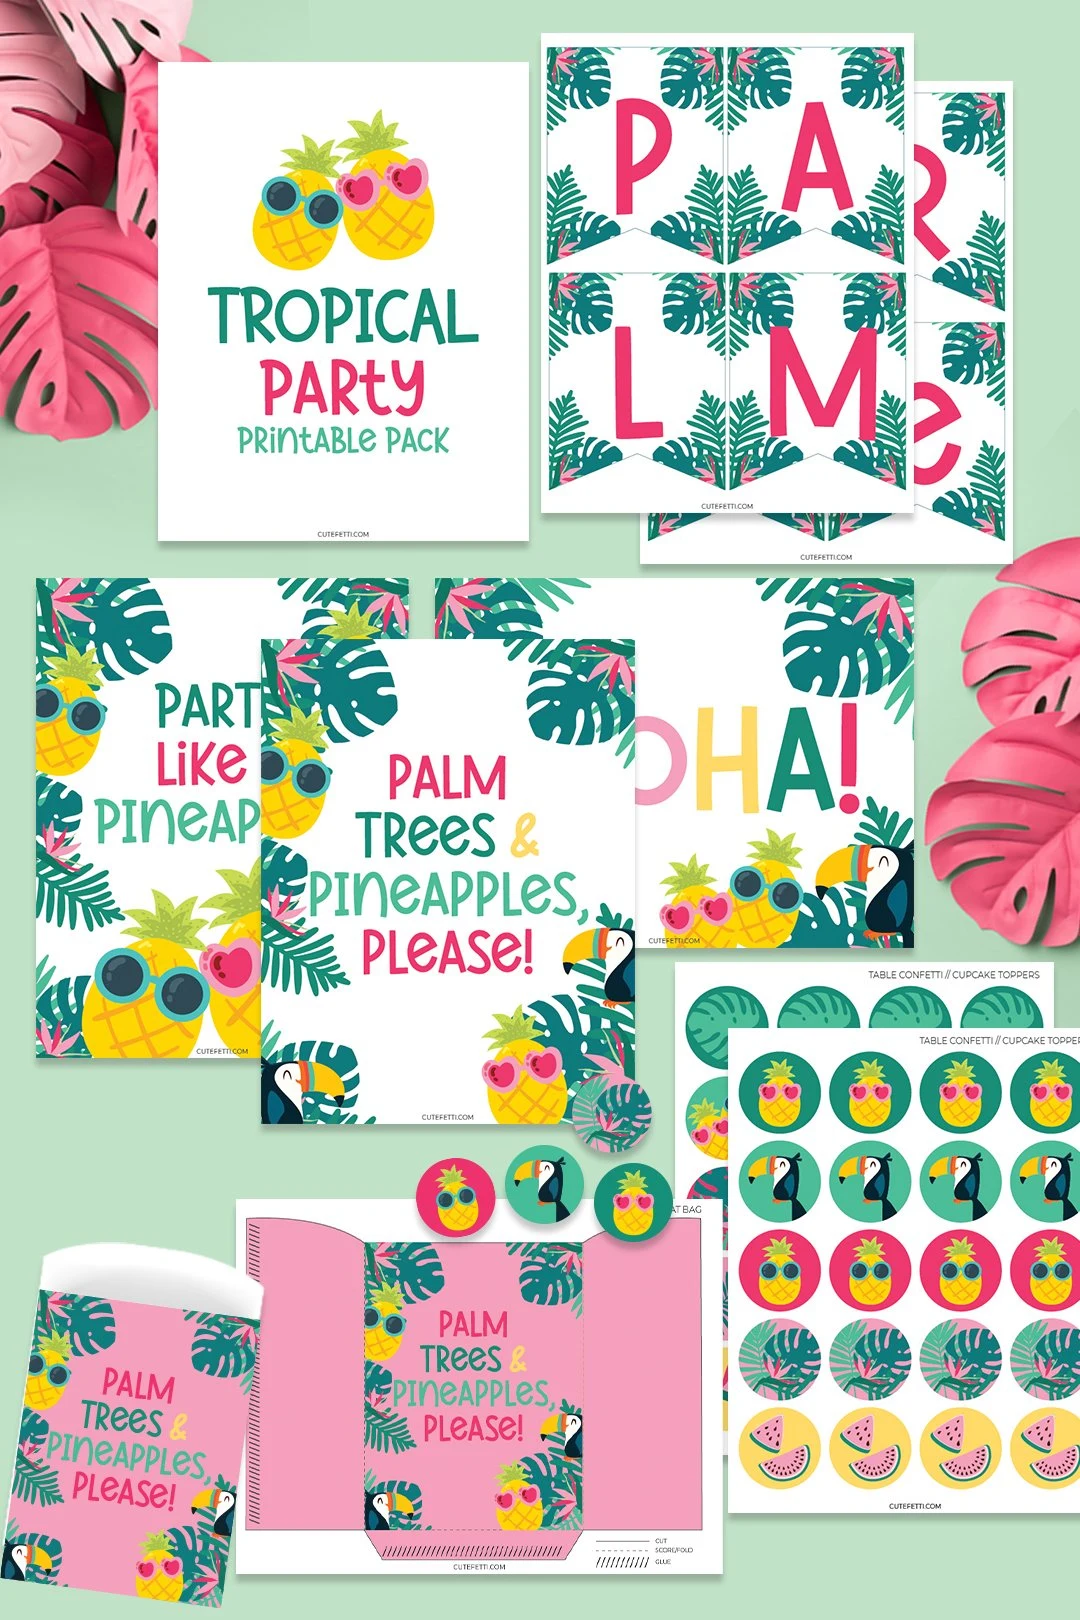 tropical party download promotional image